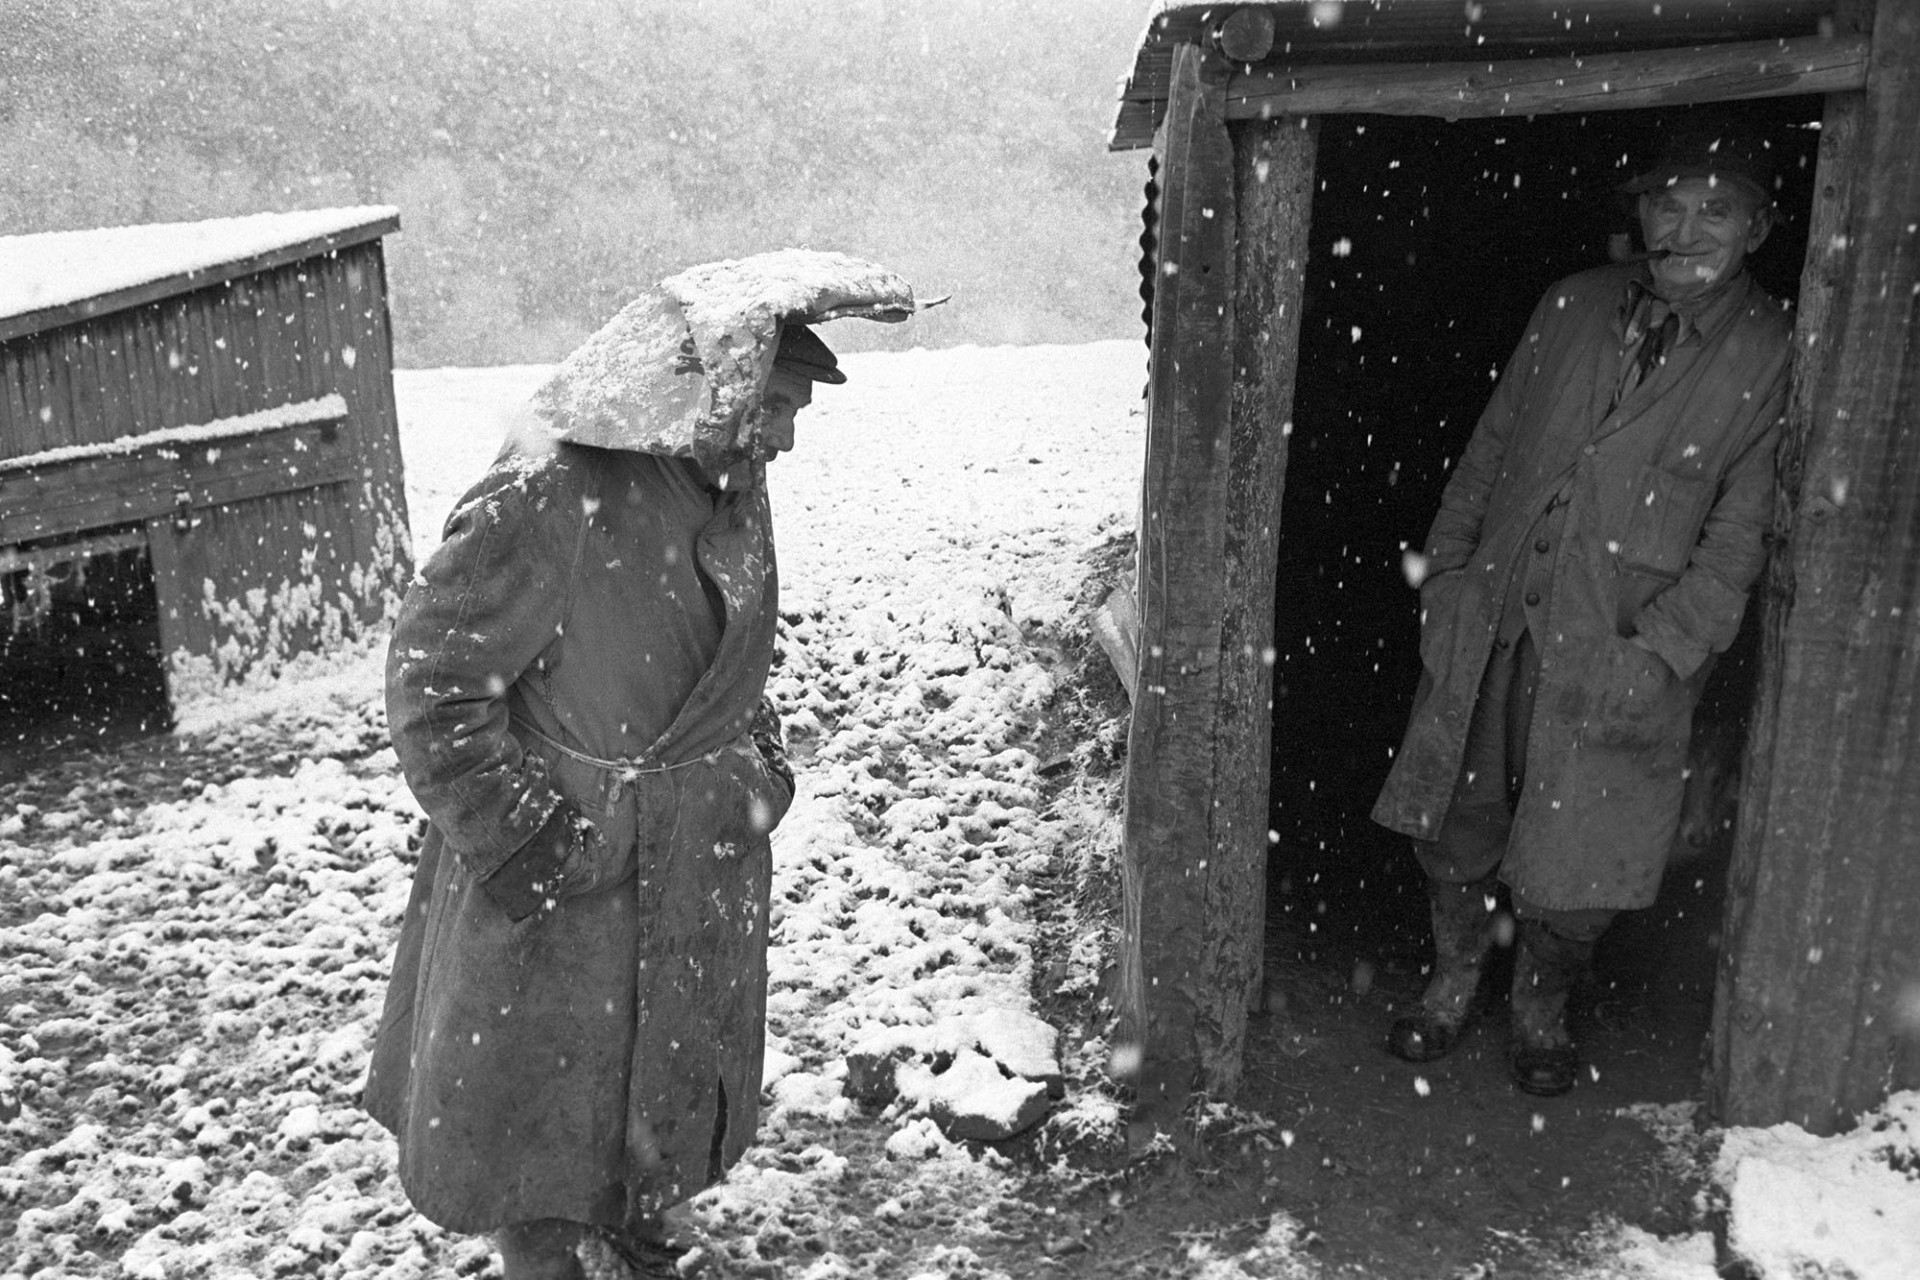 Two shepherds sheltering from the snow in shed door.
[Archie Parkhouse and Ivor Brock sheltering from the snow in a shed doorway, in a field in Millhams in Dolton. Ivor Brock has a paper sack over his head and Archie Parkhouse is smoking a pipe.]